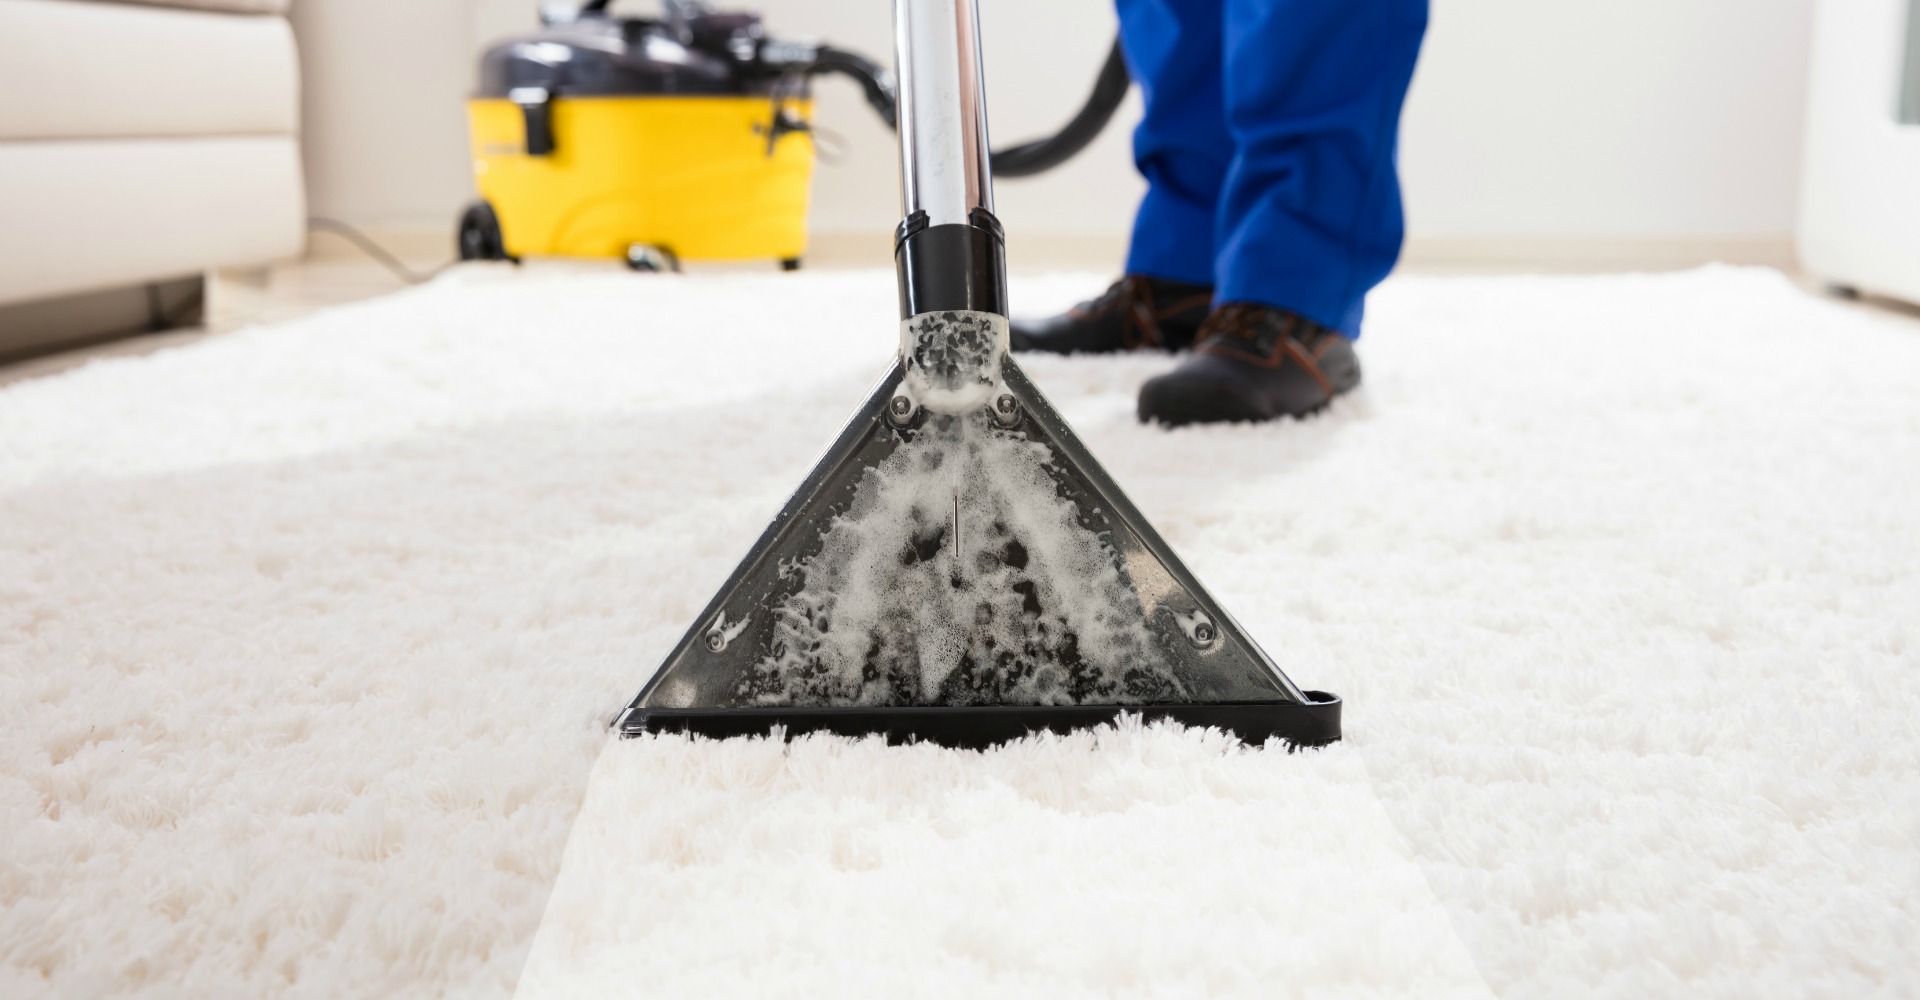 Carpet Cleaning Methods for Home